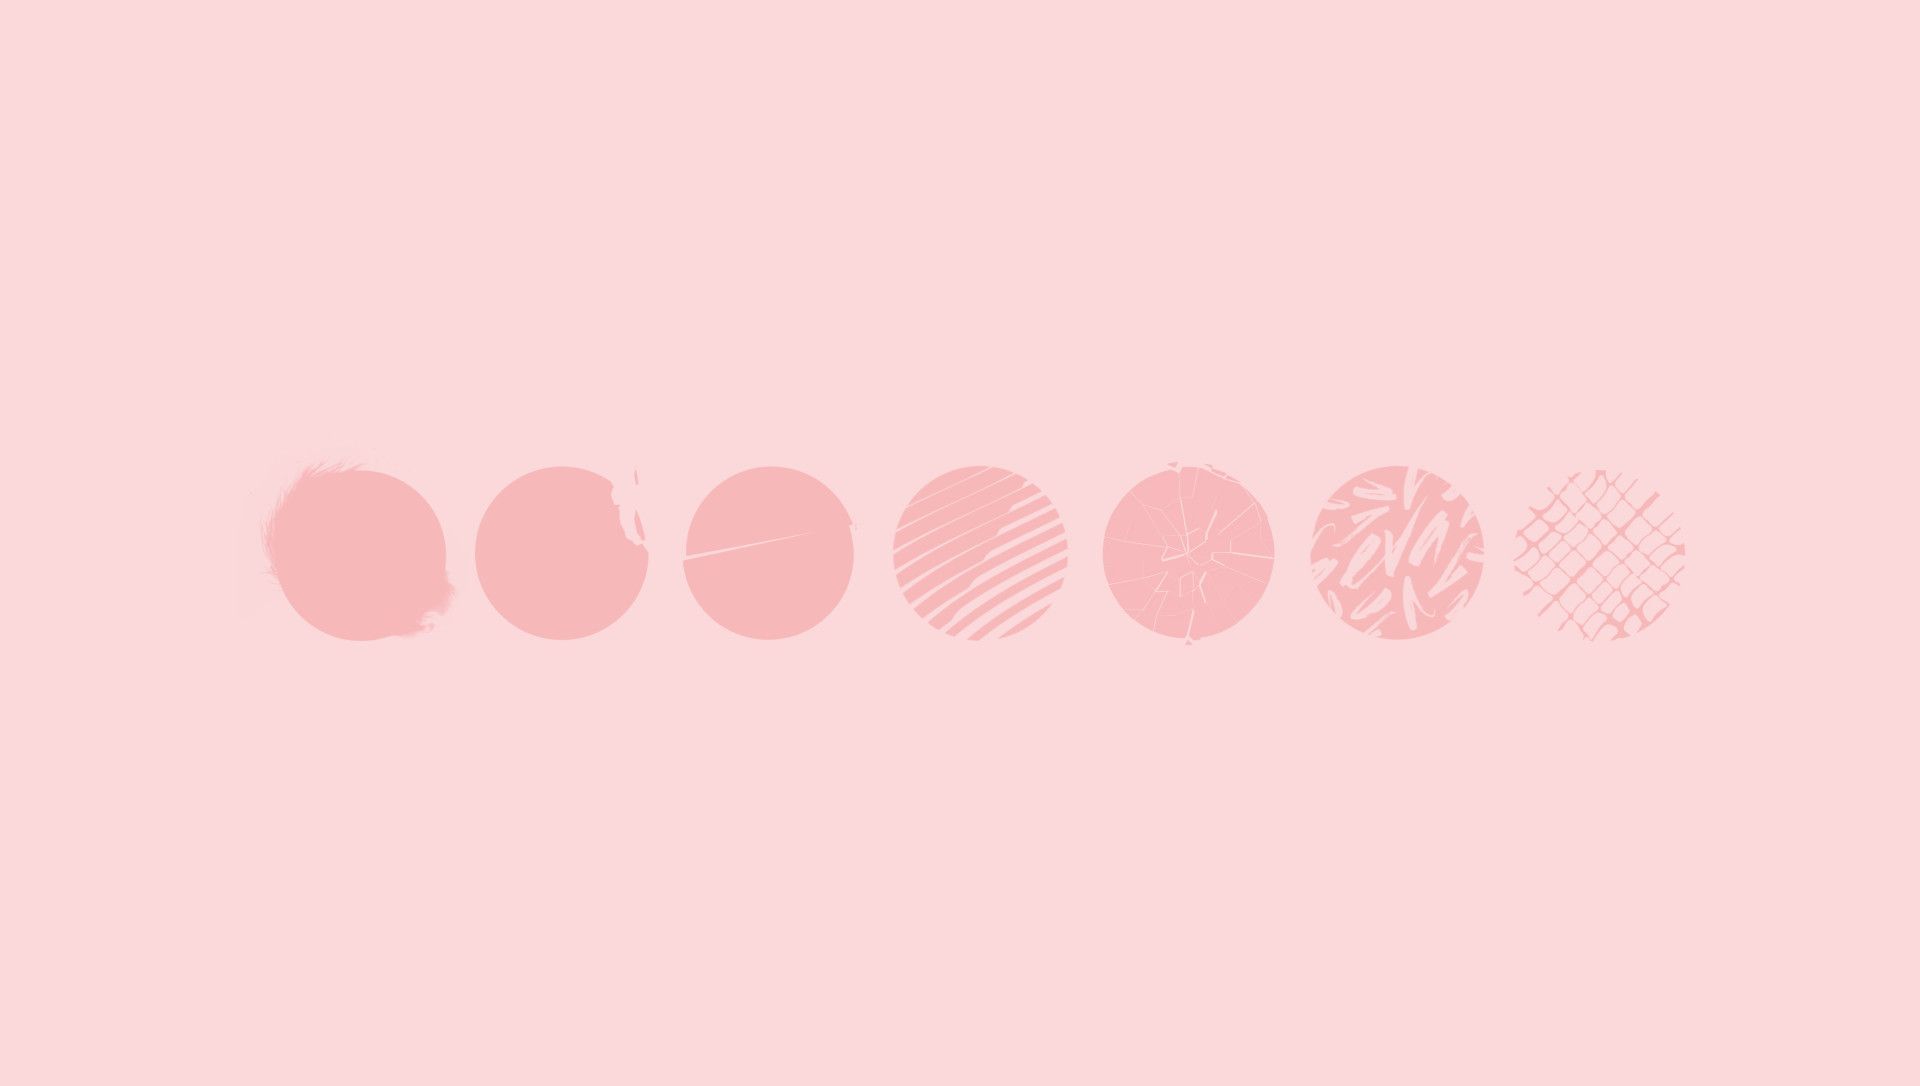 Pastel Pink Wallpaper Background Aesthetic. Aesthetic desktop wallpaper, Pastel pink aesthetic, Pink aesthetic